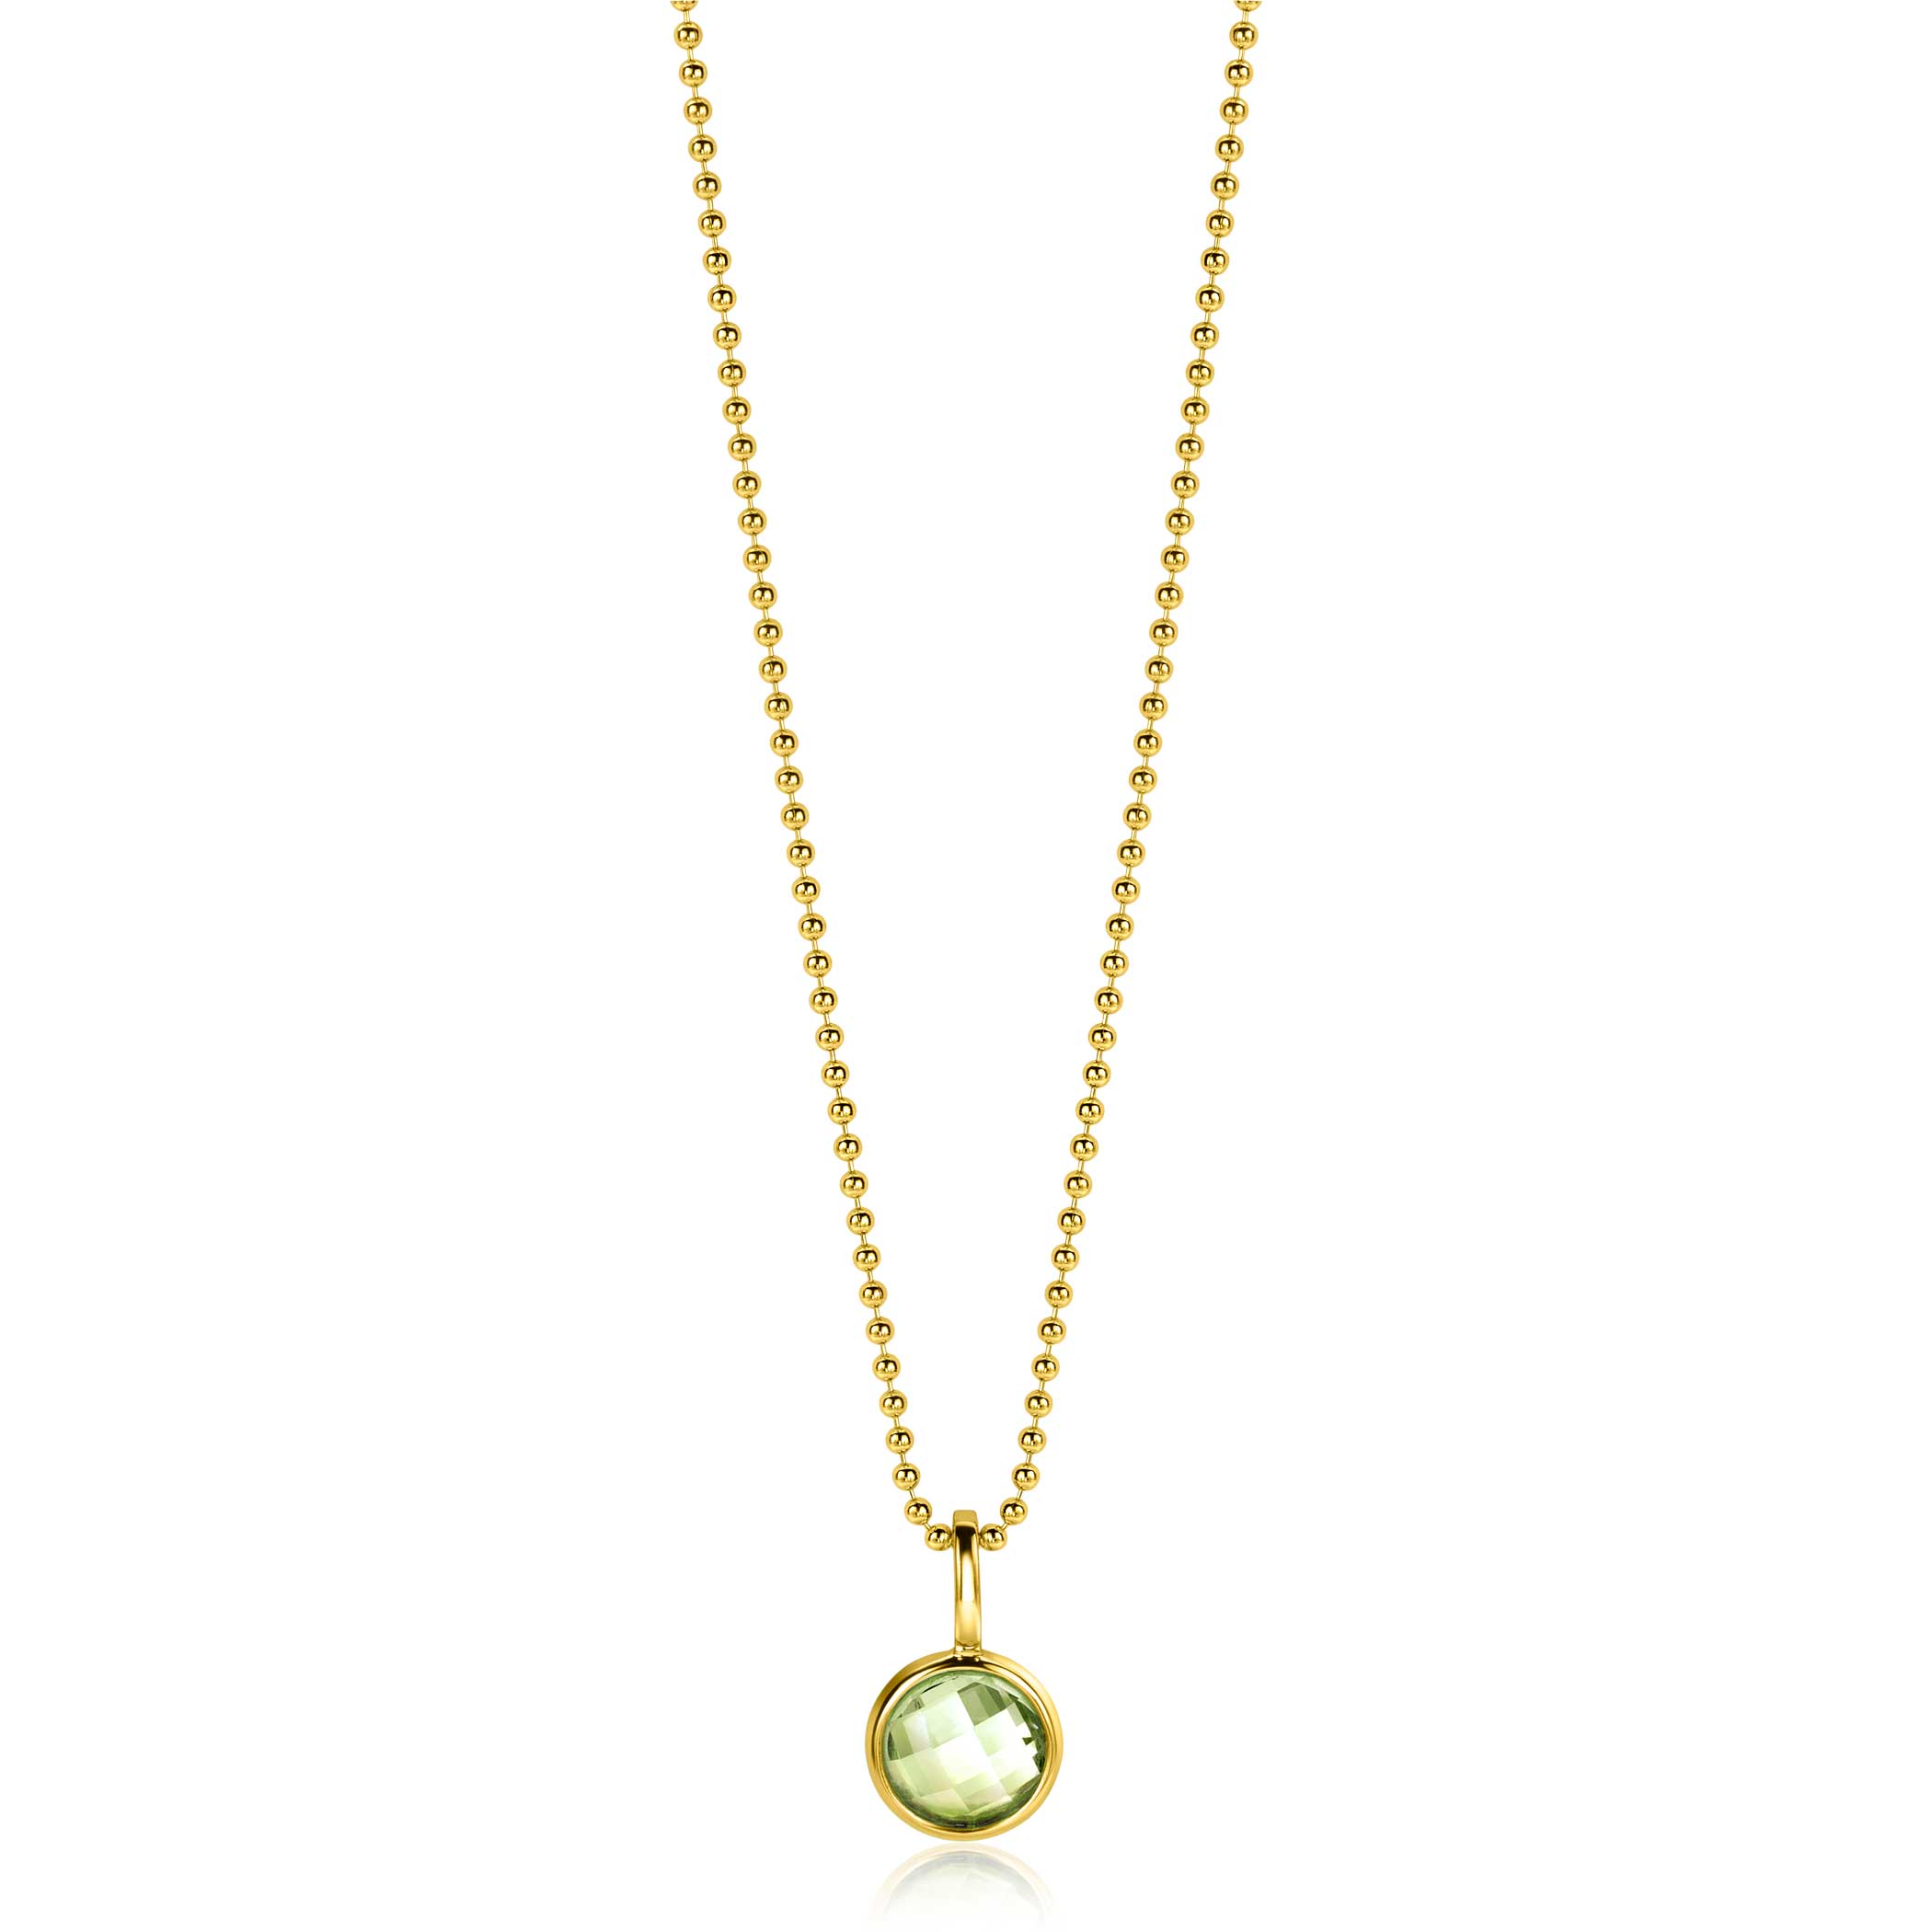 AUGUST Pendant 8mm Gold Plated Birthstone Green Peridot Zirconia (excl. necklace)